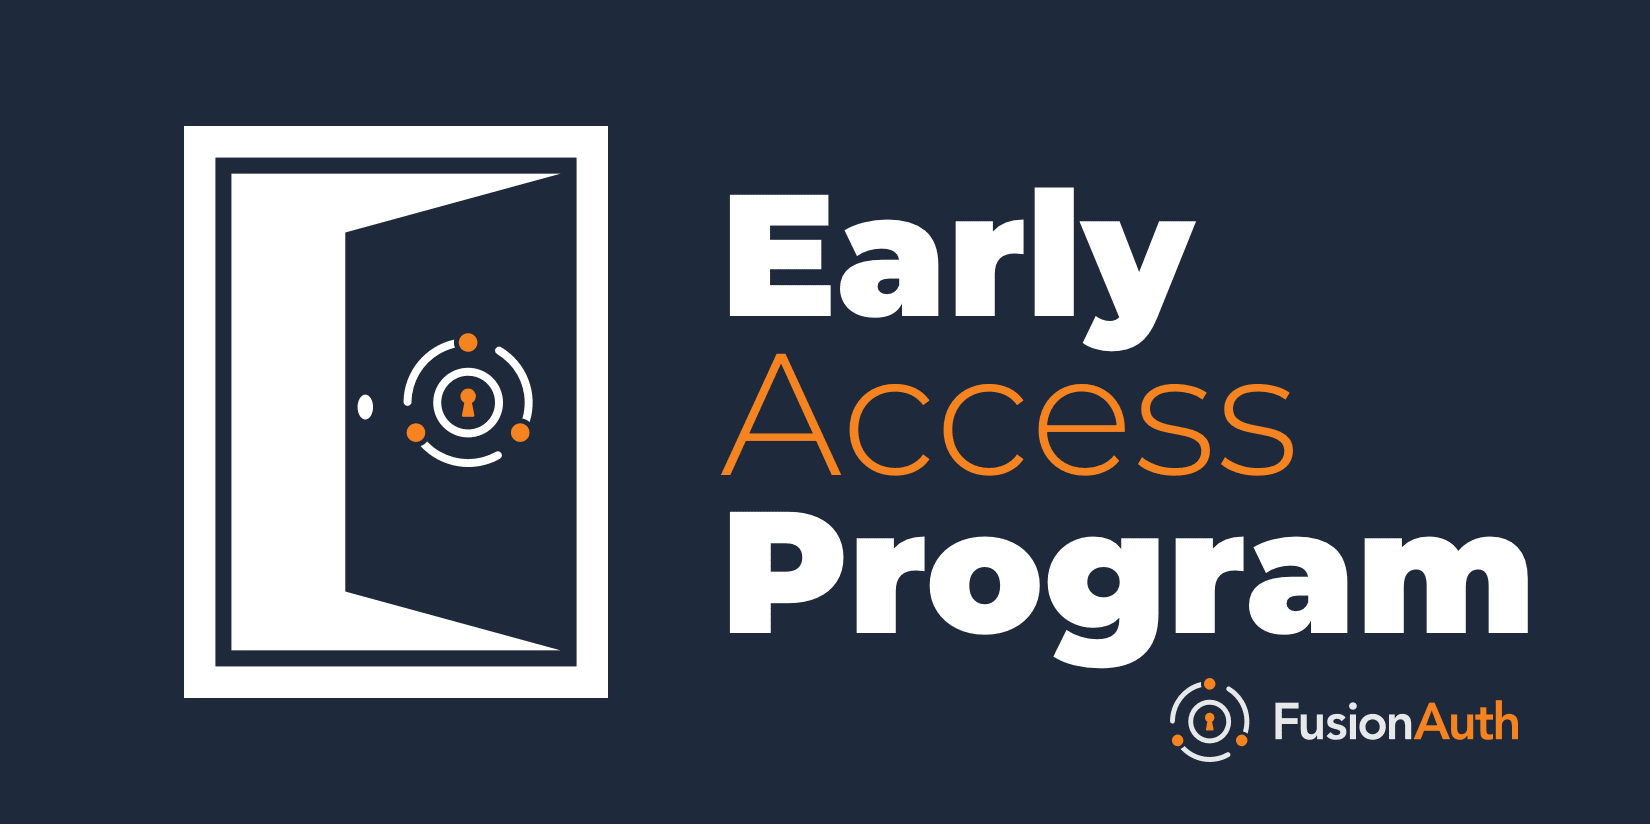 Introducing the FusionAuth Early Access Program